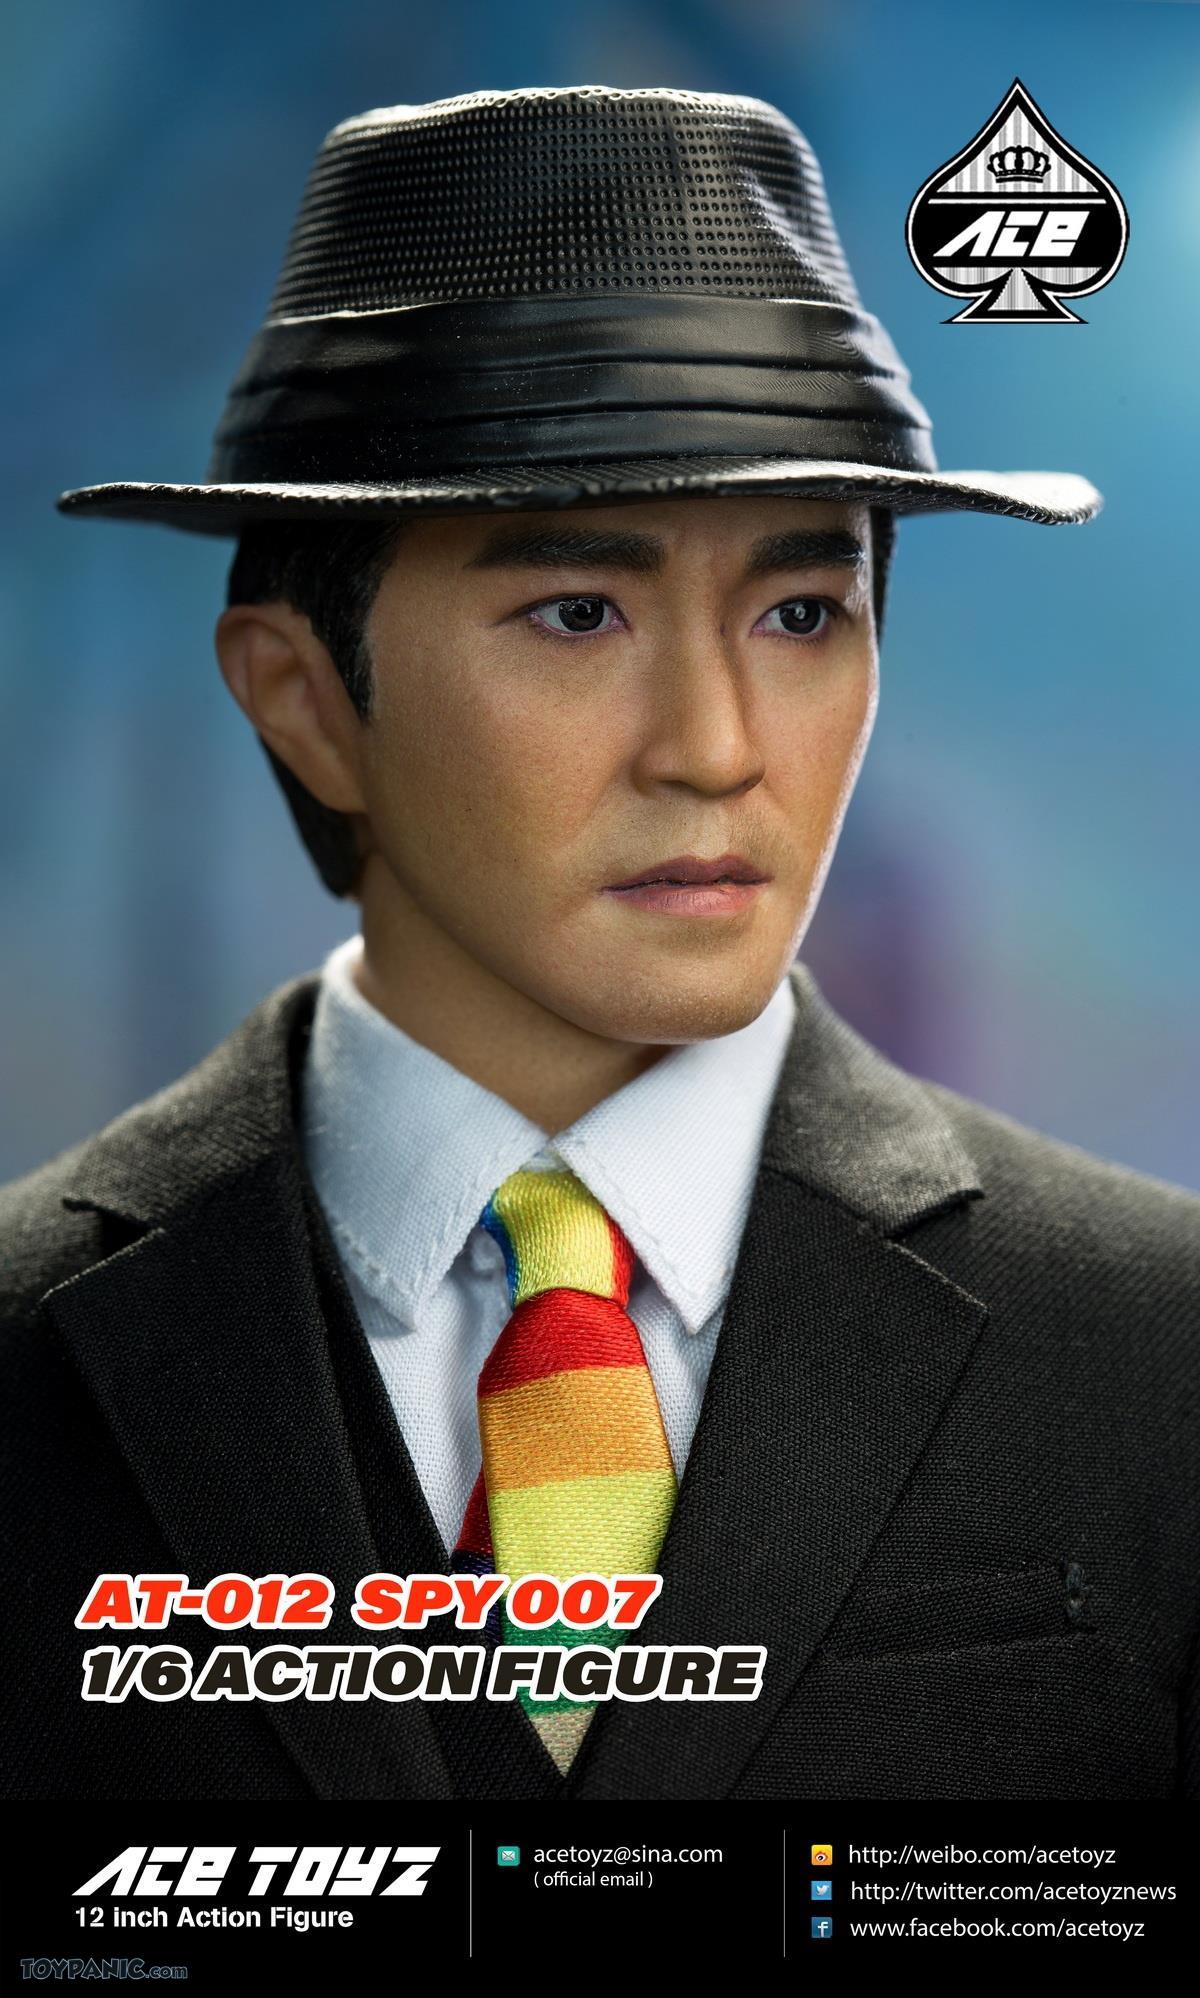 NEW PRODUCT: 1/6 scale Spy 007 Action Figure from Acetoyz  3011202210229AM_943336